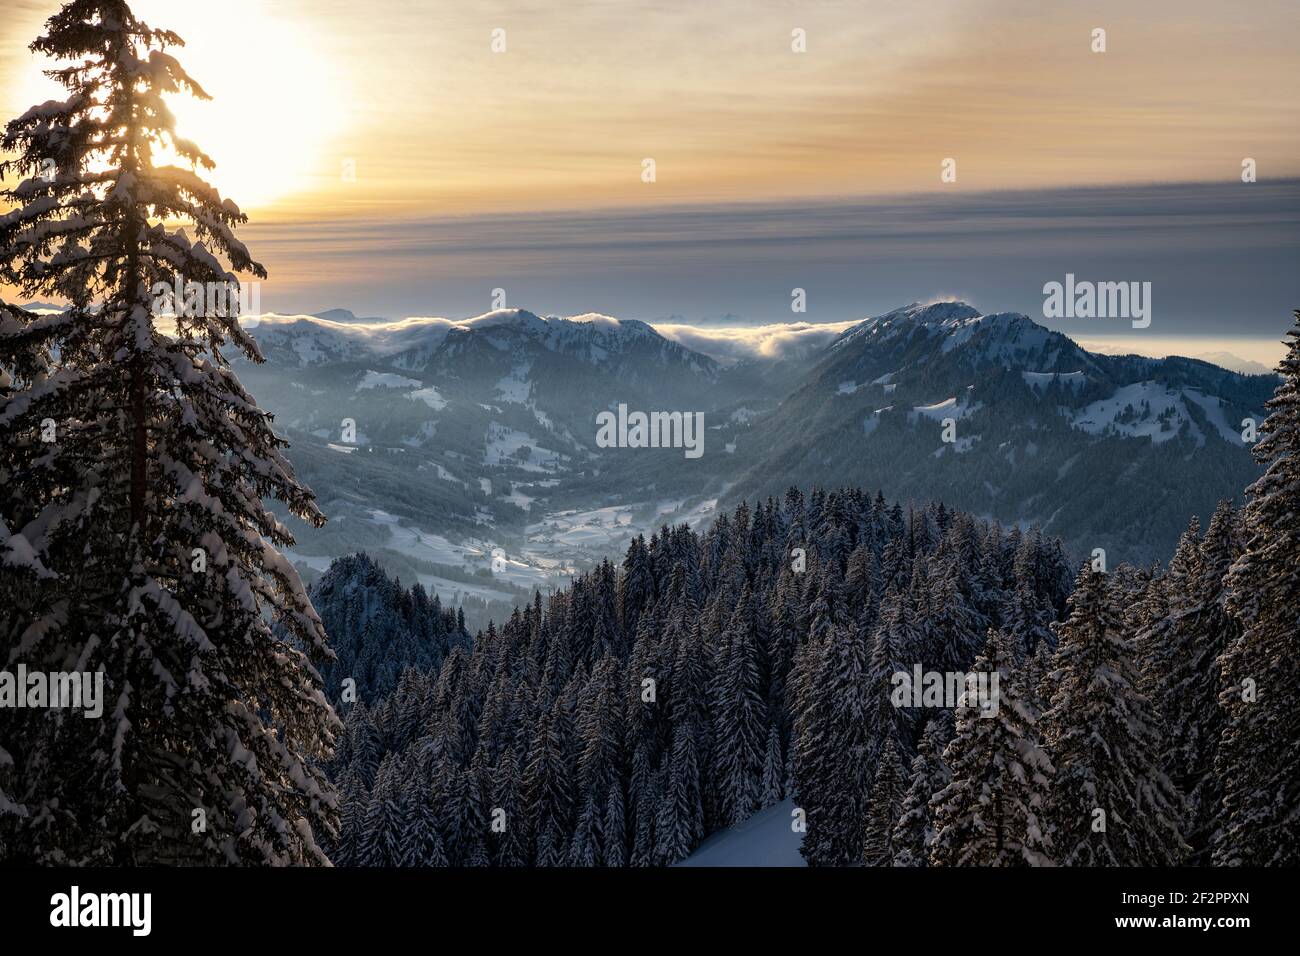 Snowy winter landscape at sunset in the Allgäu Alps. View into the Gunzesrieder valley. Bayern Germany Stock Photo